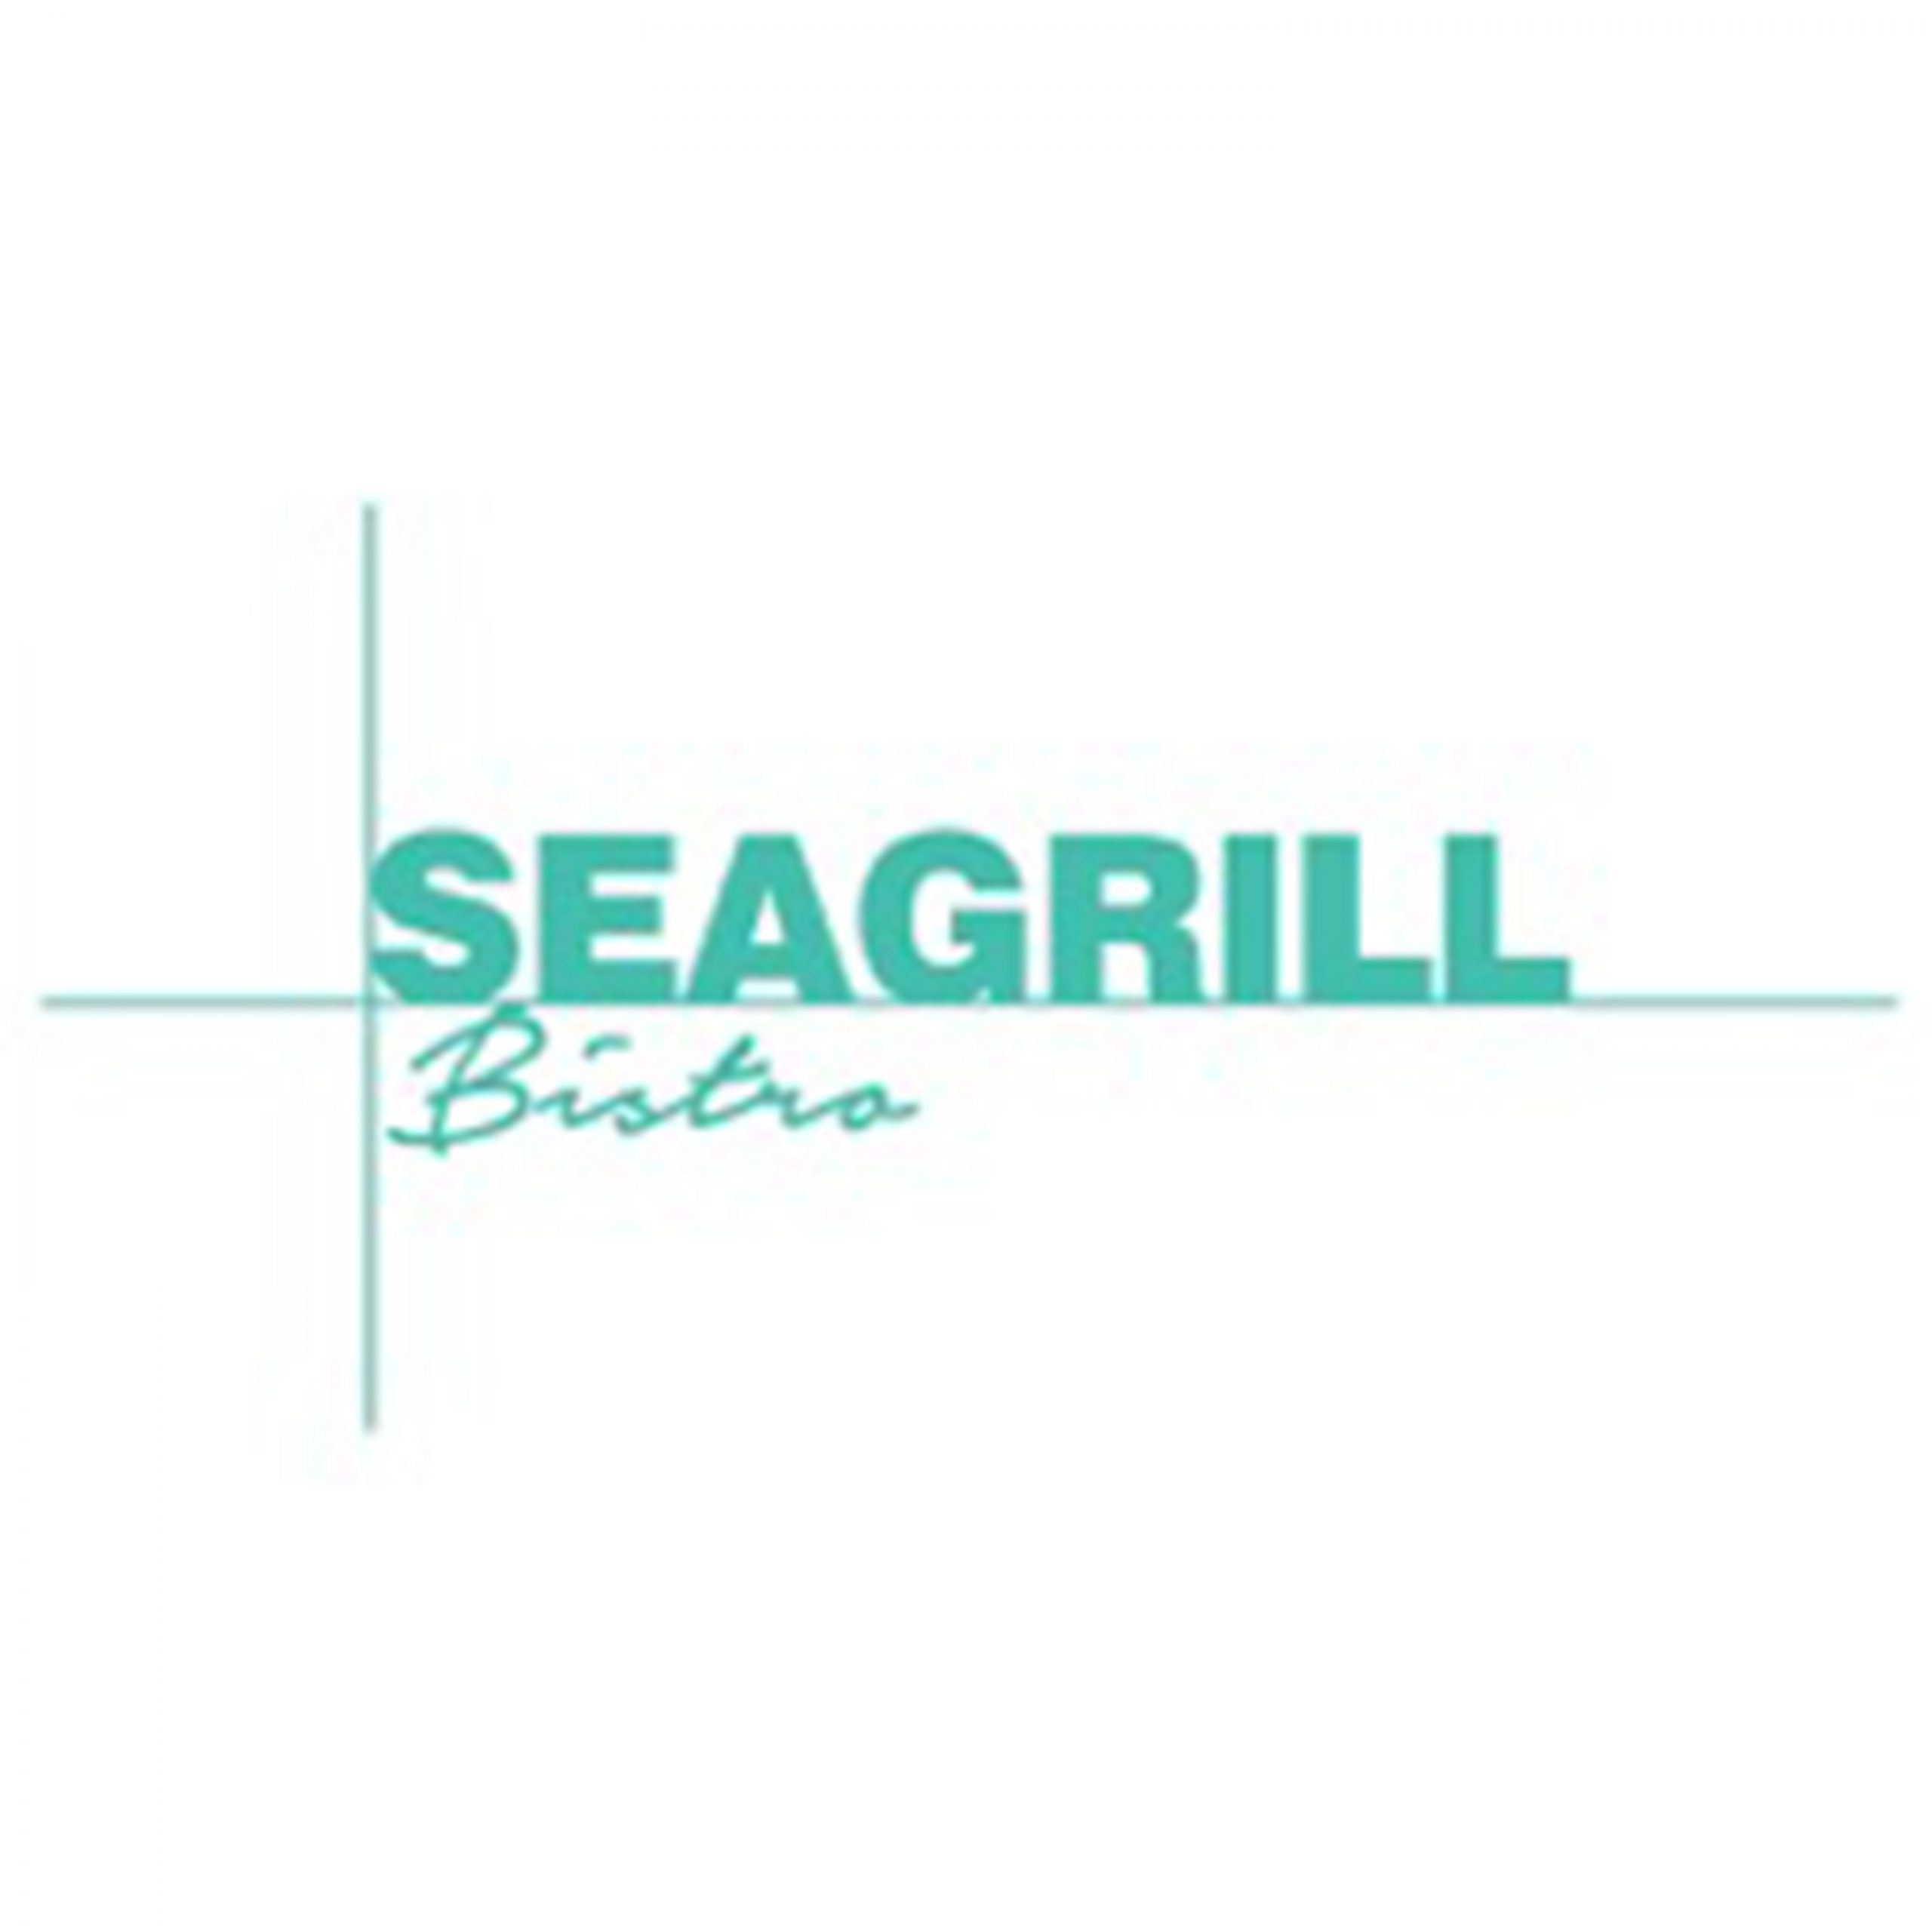 Seagrill Bistro in Palm Jumeirah